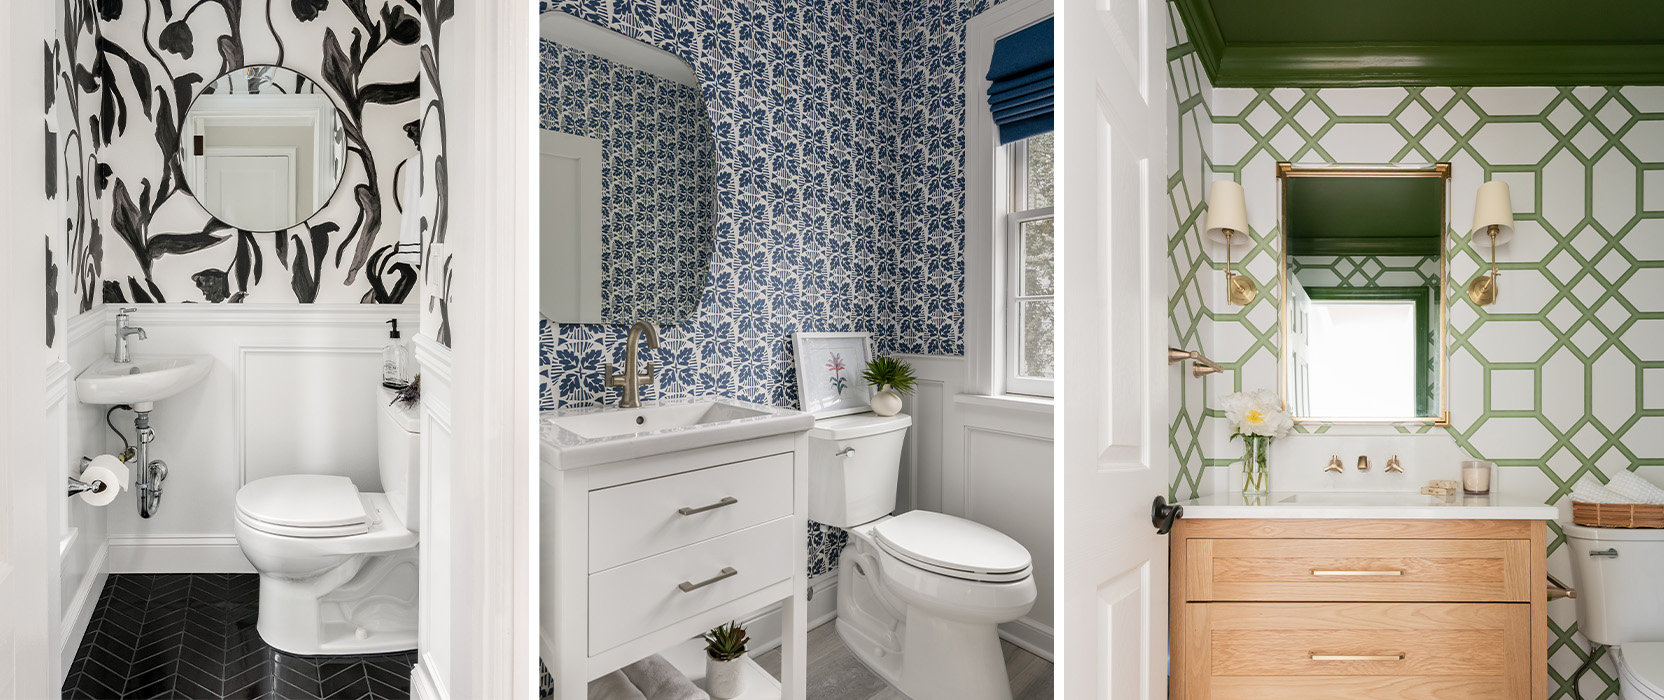 Left image: Small half bath with corner sink and black and white patterned wallpaper above wainscoting painted Extra White. Right image: Sink and toilet in blue-and-white wallpapered bathroom with Extra White wainscoting.